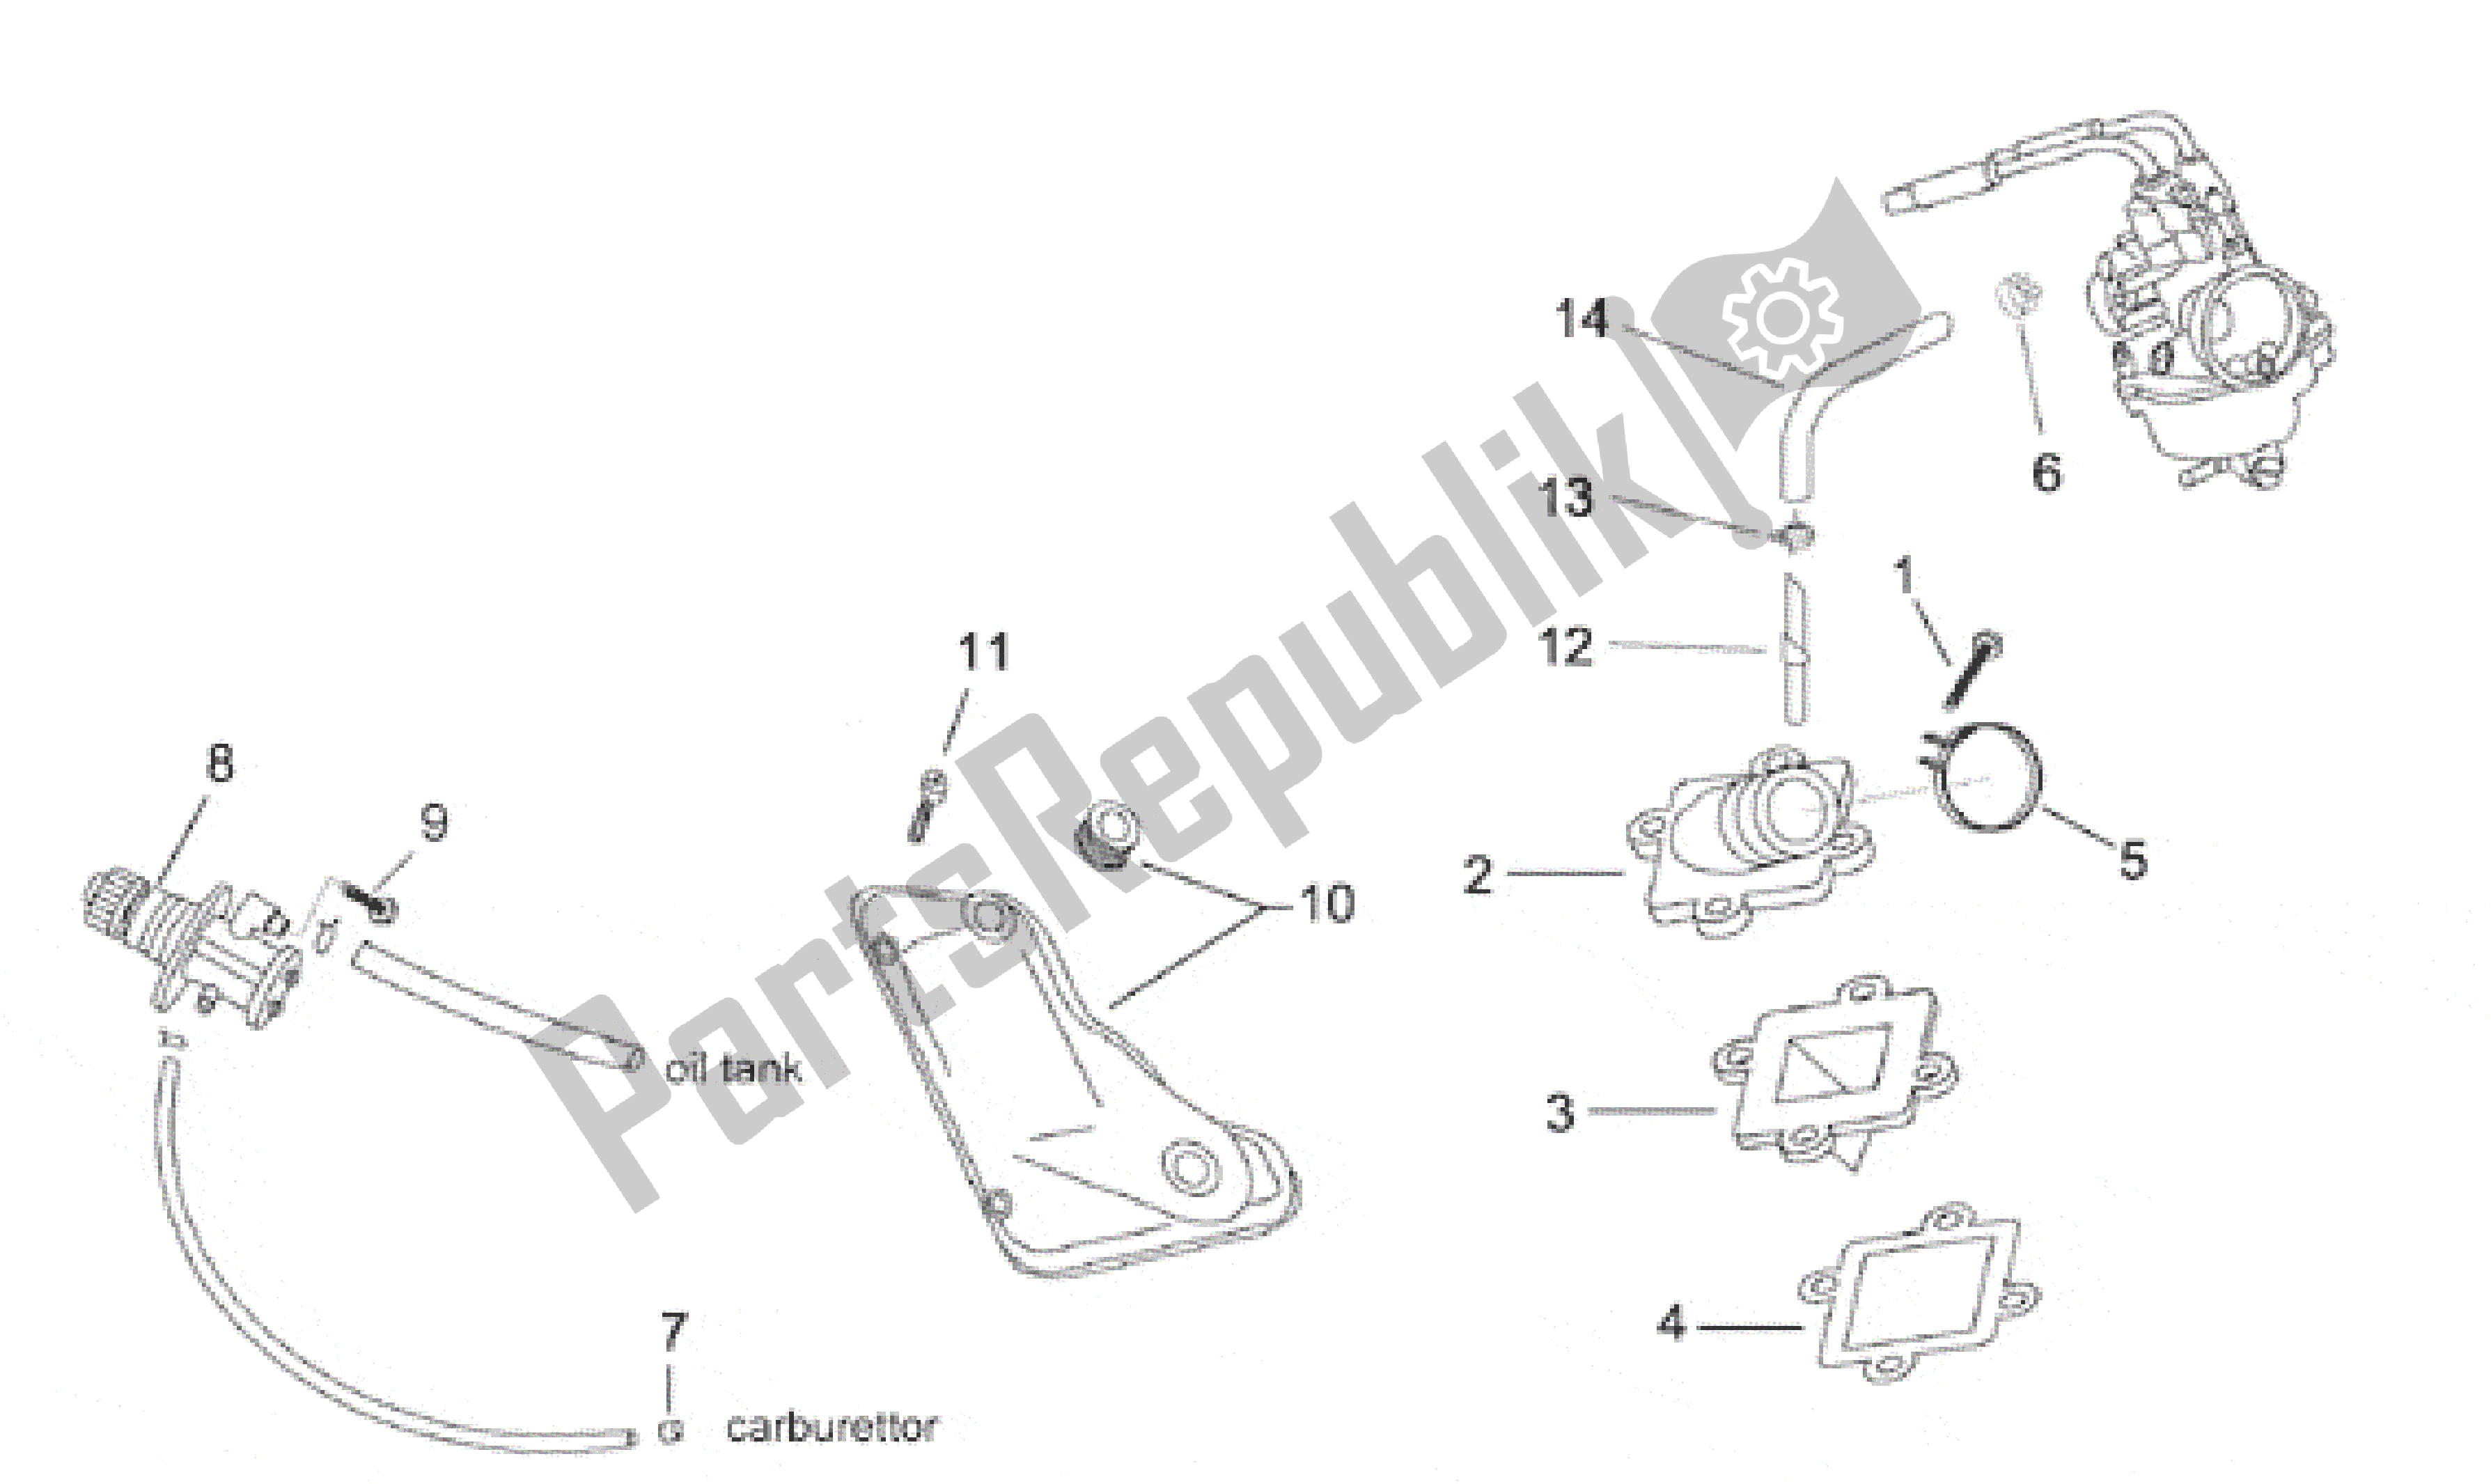 All parts for the Supply - Oil Pump of the Aprilia Rally 50 1996 - 1999